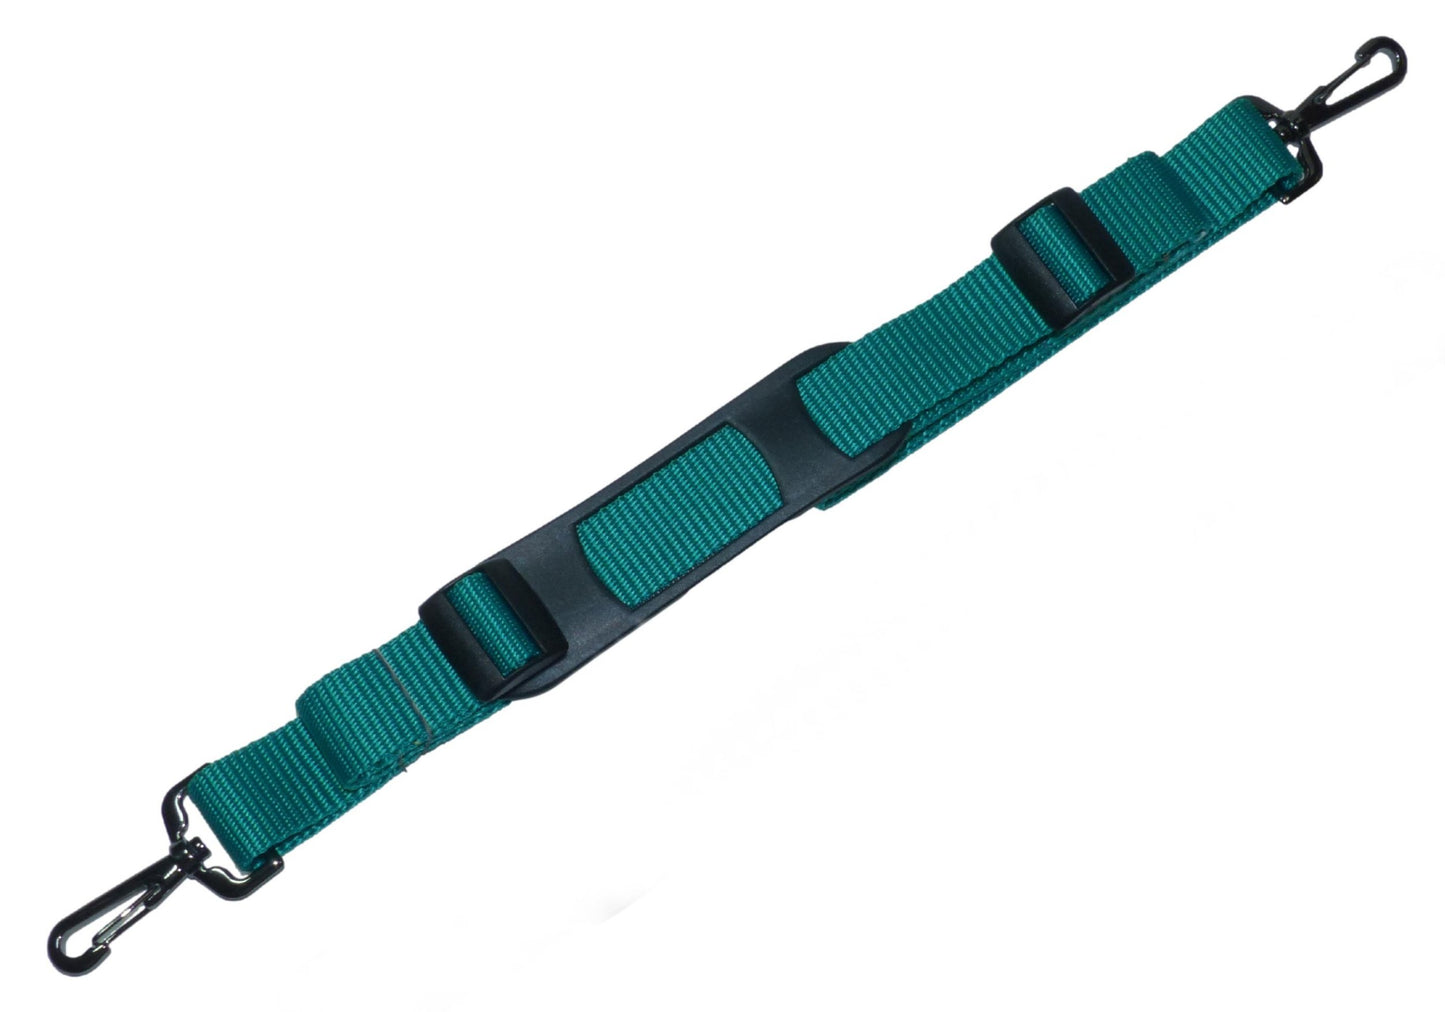 Benristraps 25mm Bag Strap with Metal Buckles and Shoulder Pad, 150cm in emerald green